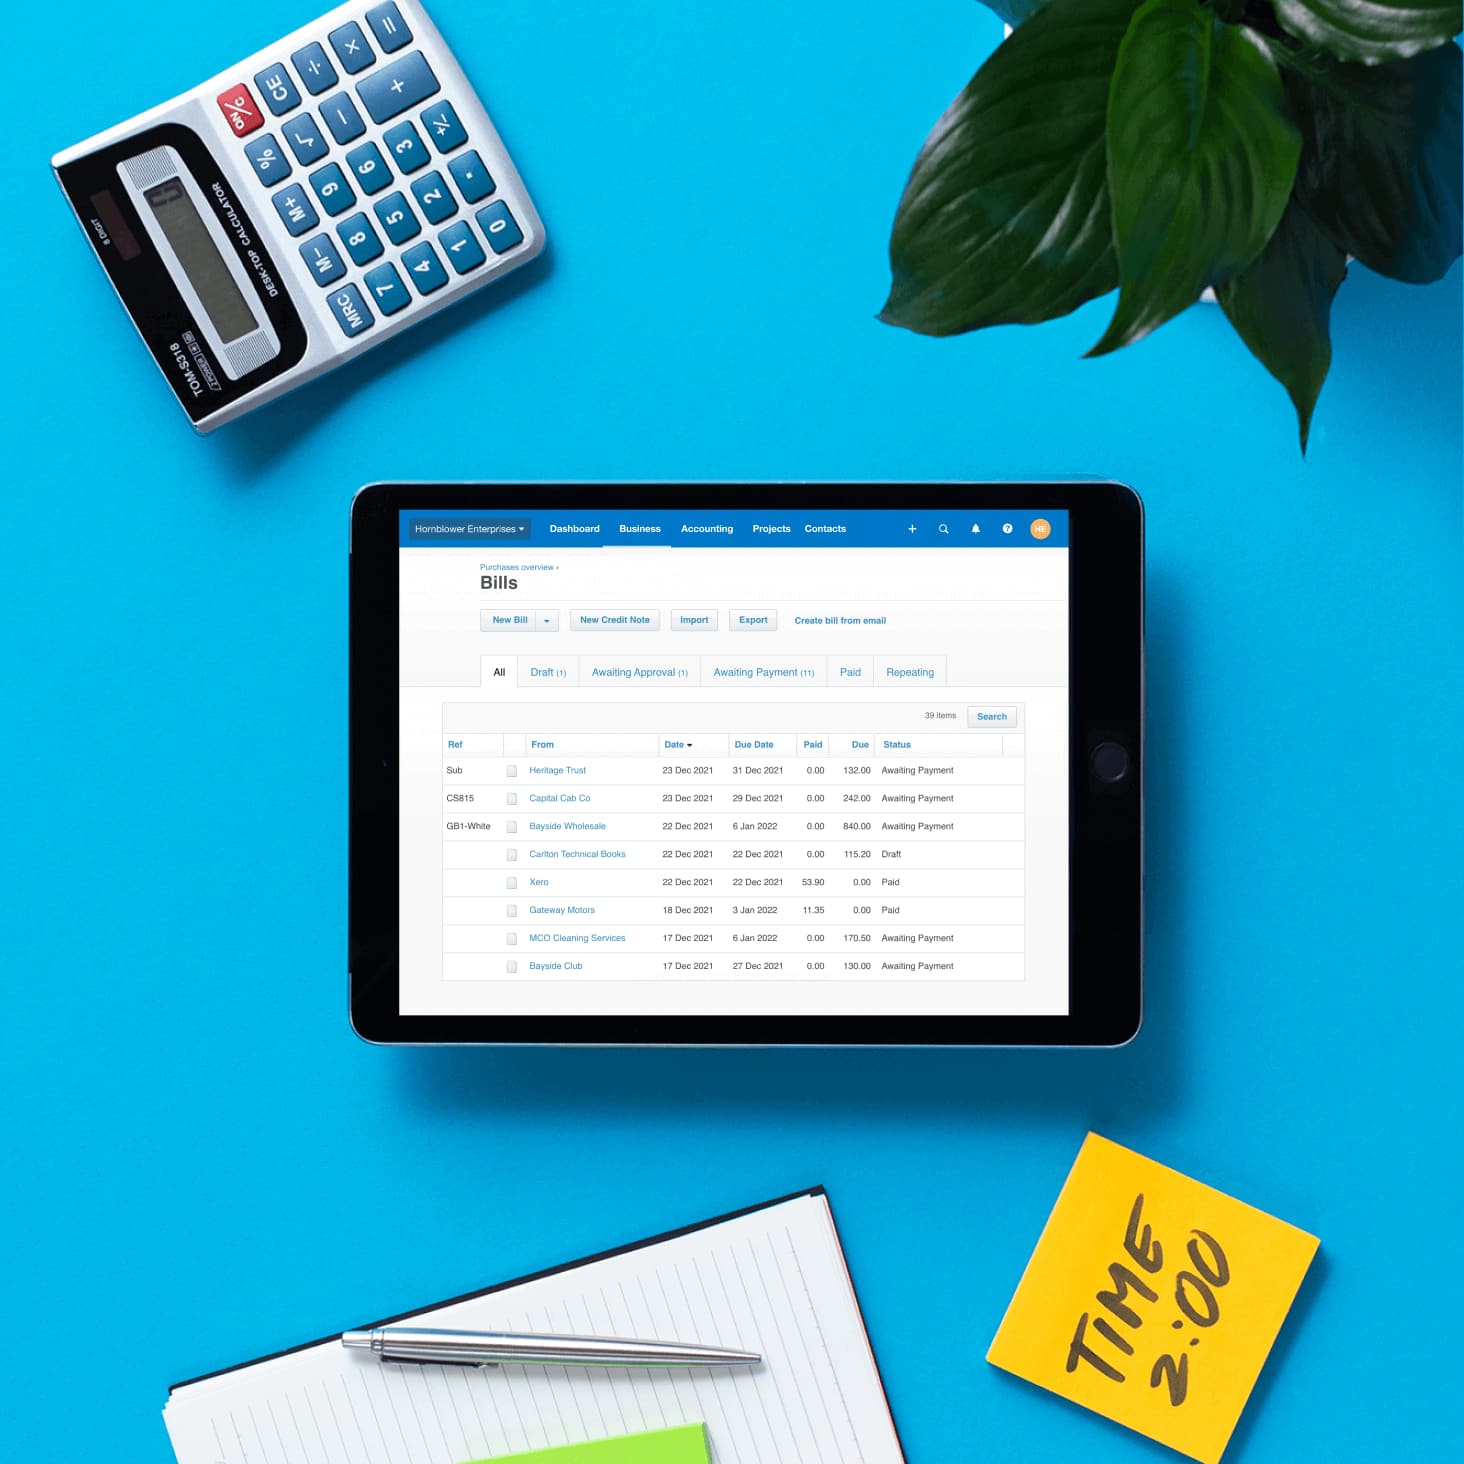 The Bills screen in Xero shows a list of bills, including eInvoices received as draft bills ready to be approved and paid.